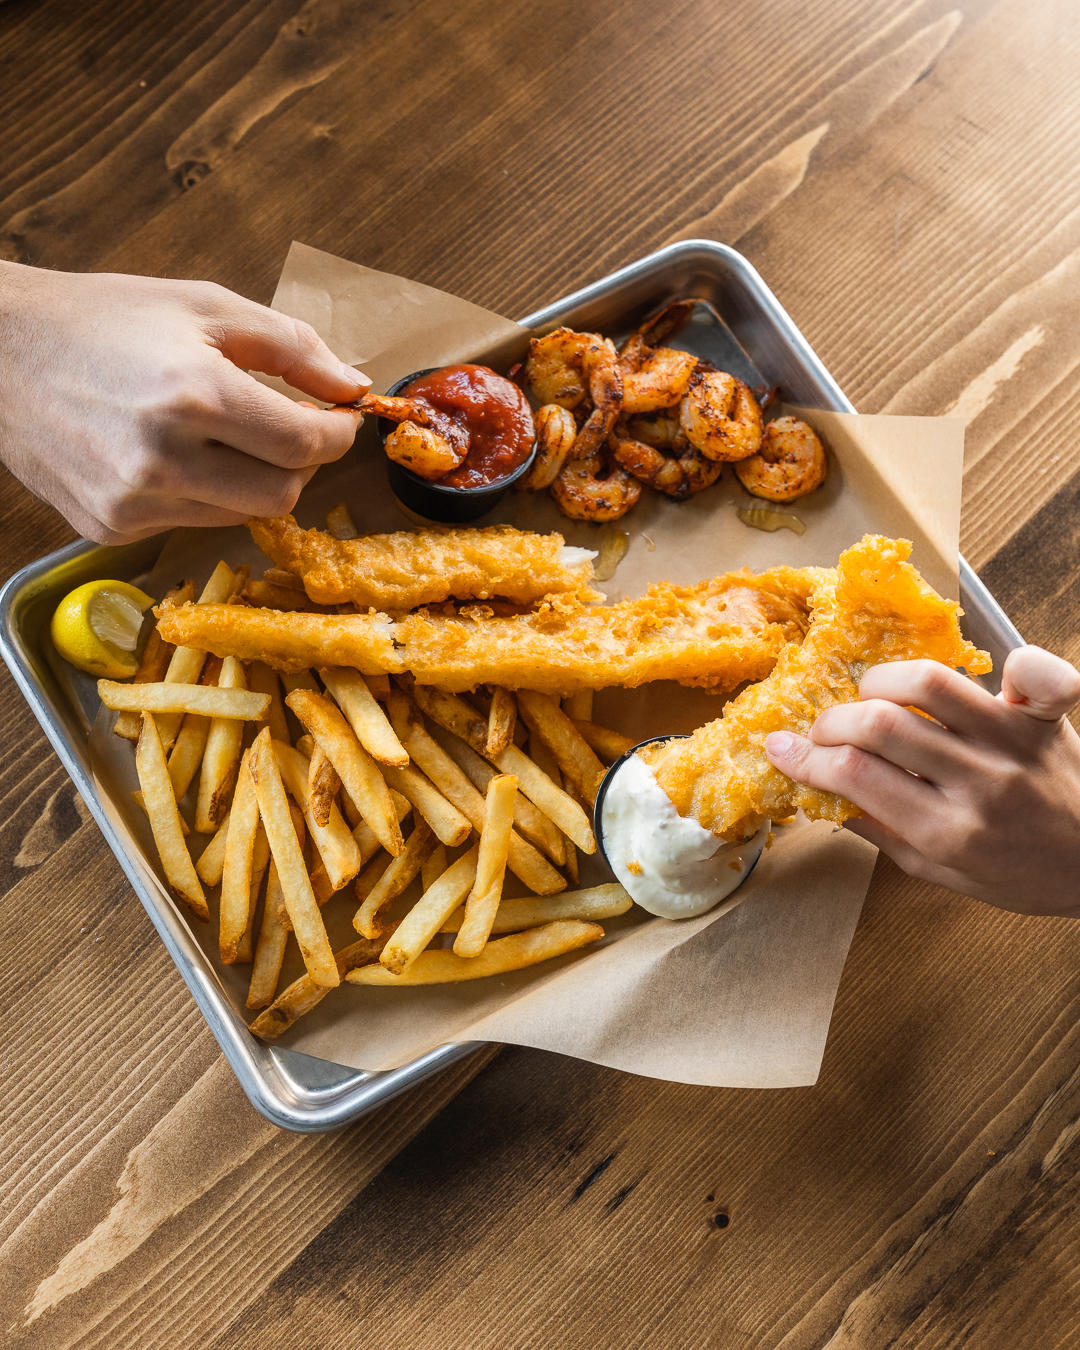 JOEY'S FAMOUS FISH & SHRIMP COMBO - Two pieces of Joey's Famous Fish, and shrimp cooked your way, se Joey's Fish Shack Medicine Hat (403)487-4883